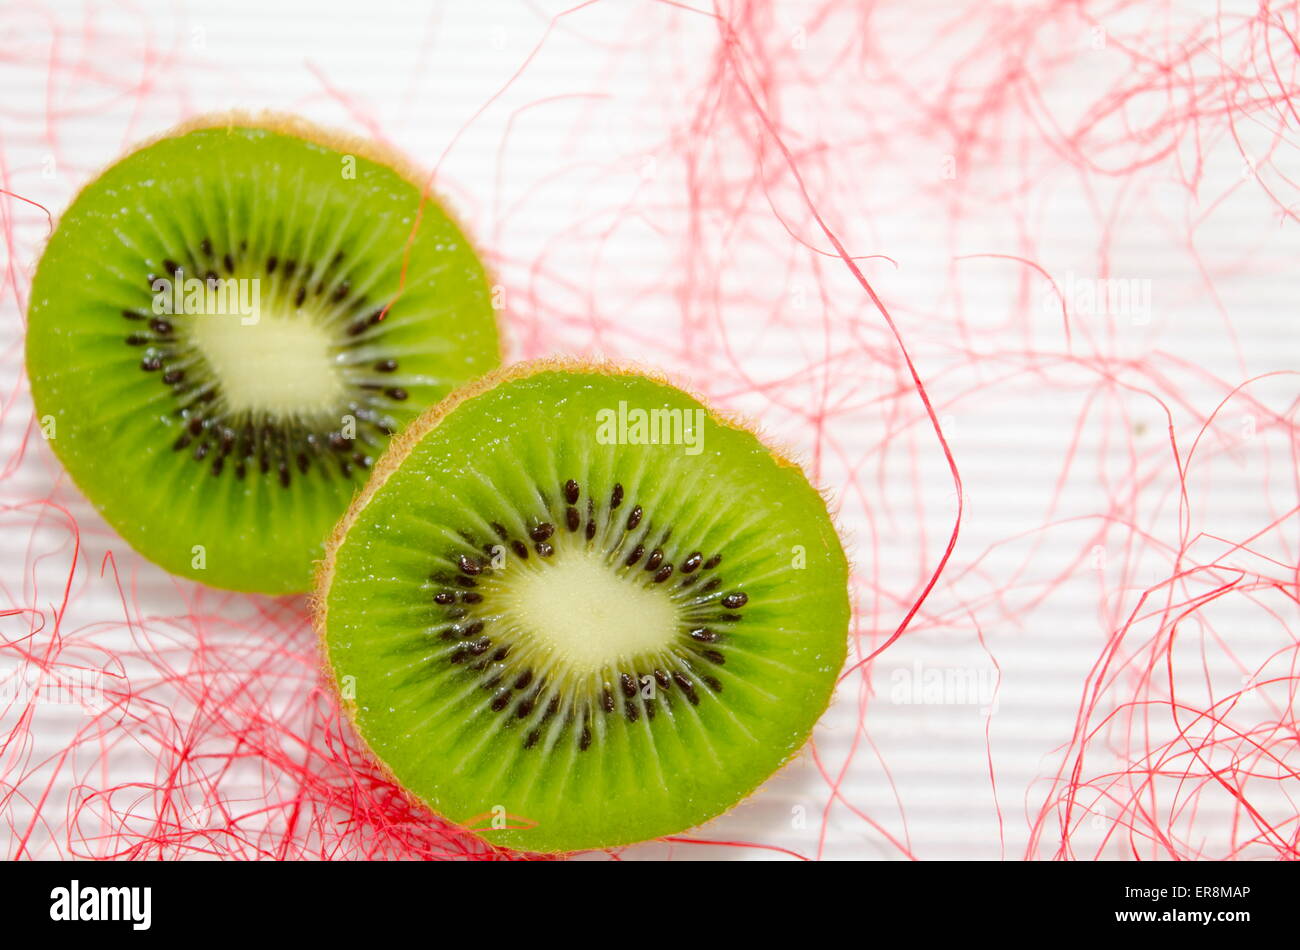 Halved kiwis on a white cardboard decorated with pink straw Stock Photo